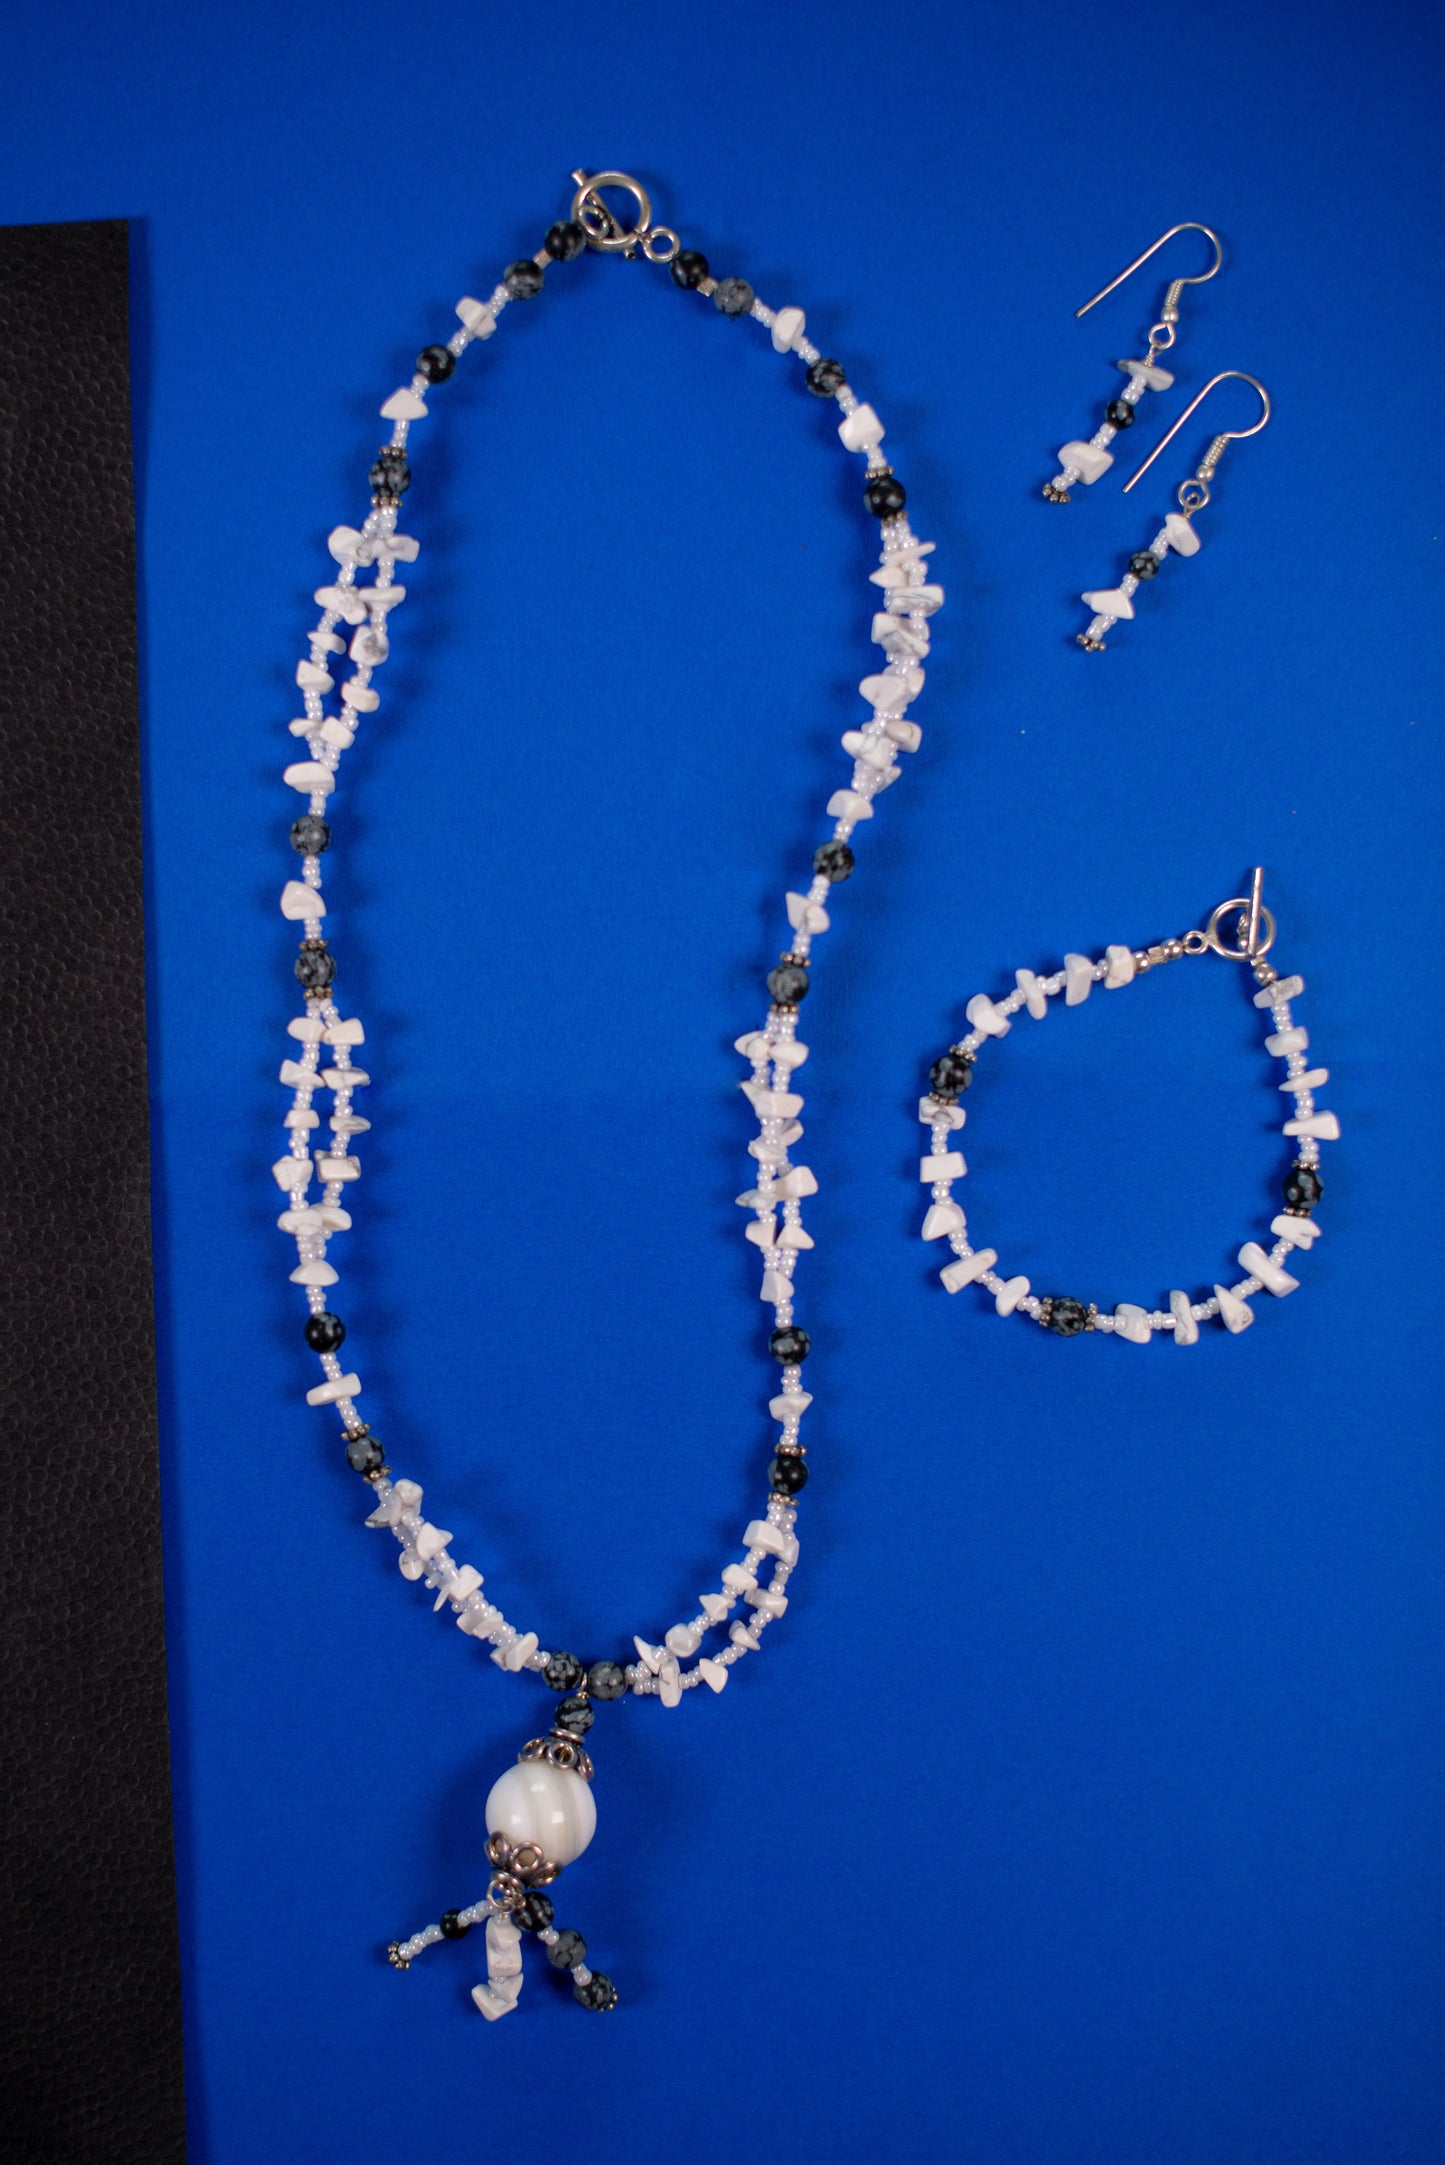 White and Gray drop Necklace/Bracelet/Earrings Set